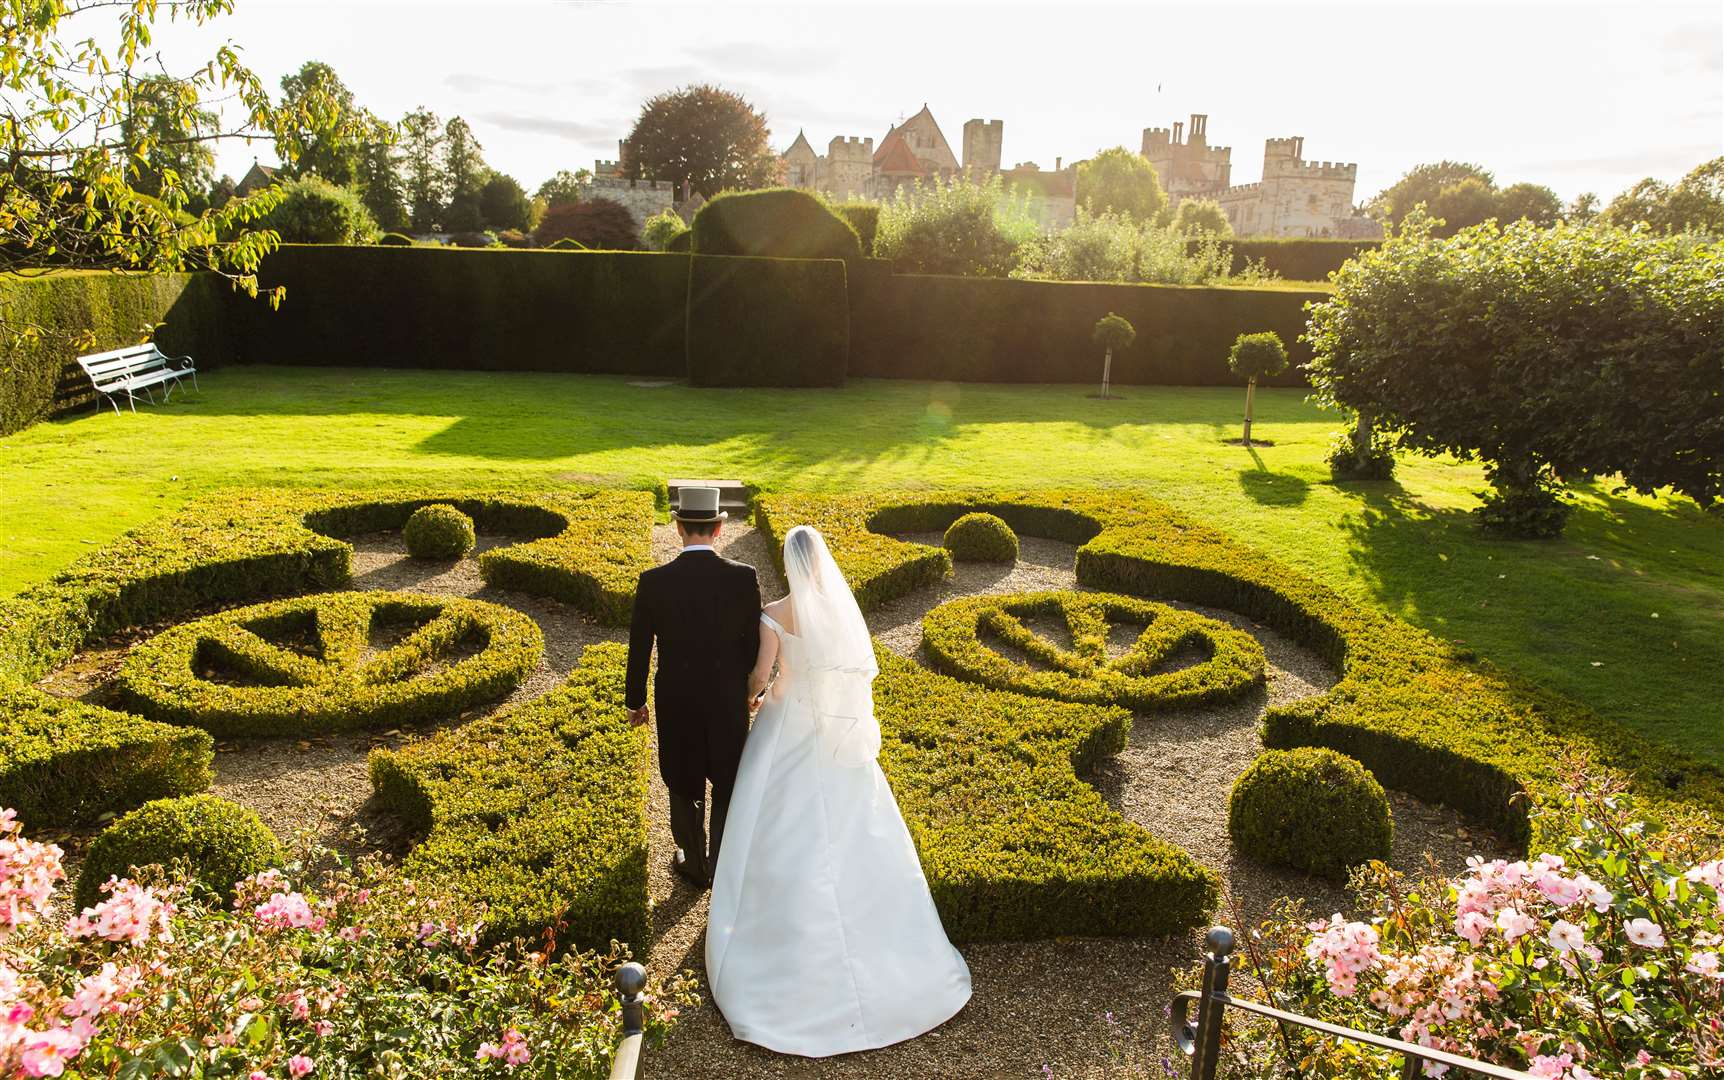 A couple on their wedding day at Penshurst Place Picture: Craig Prentis